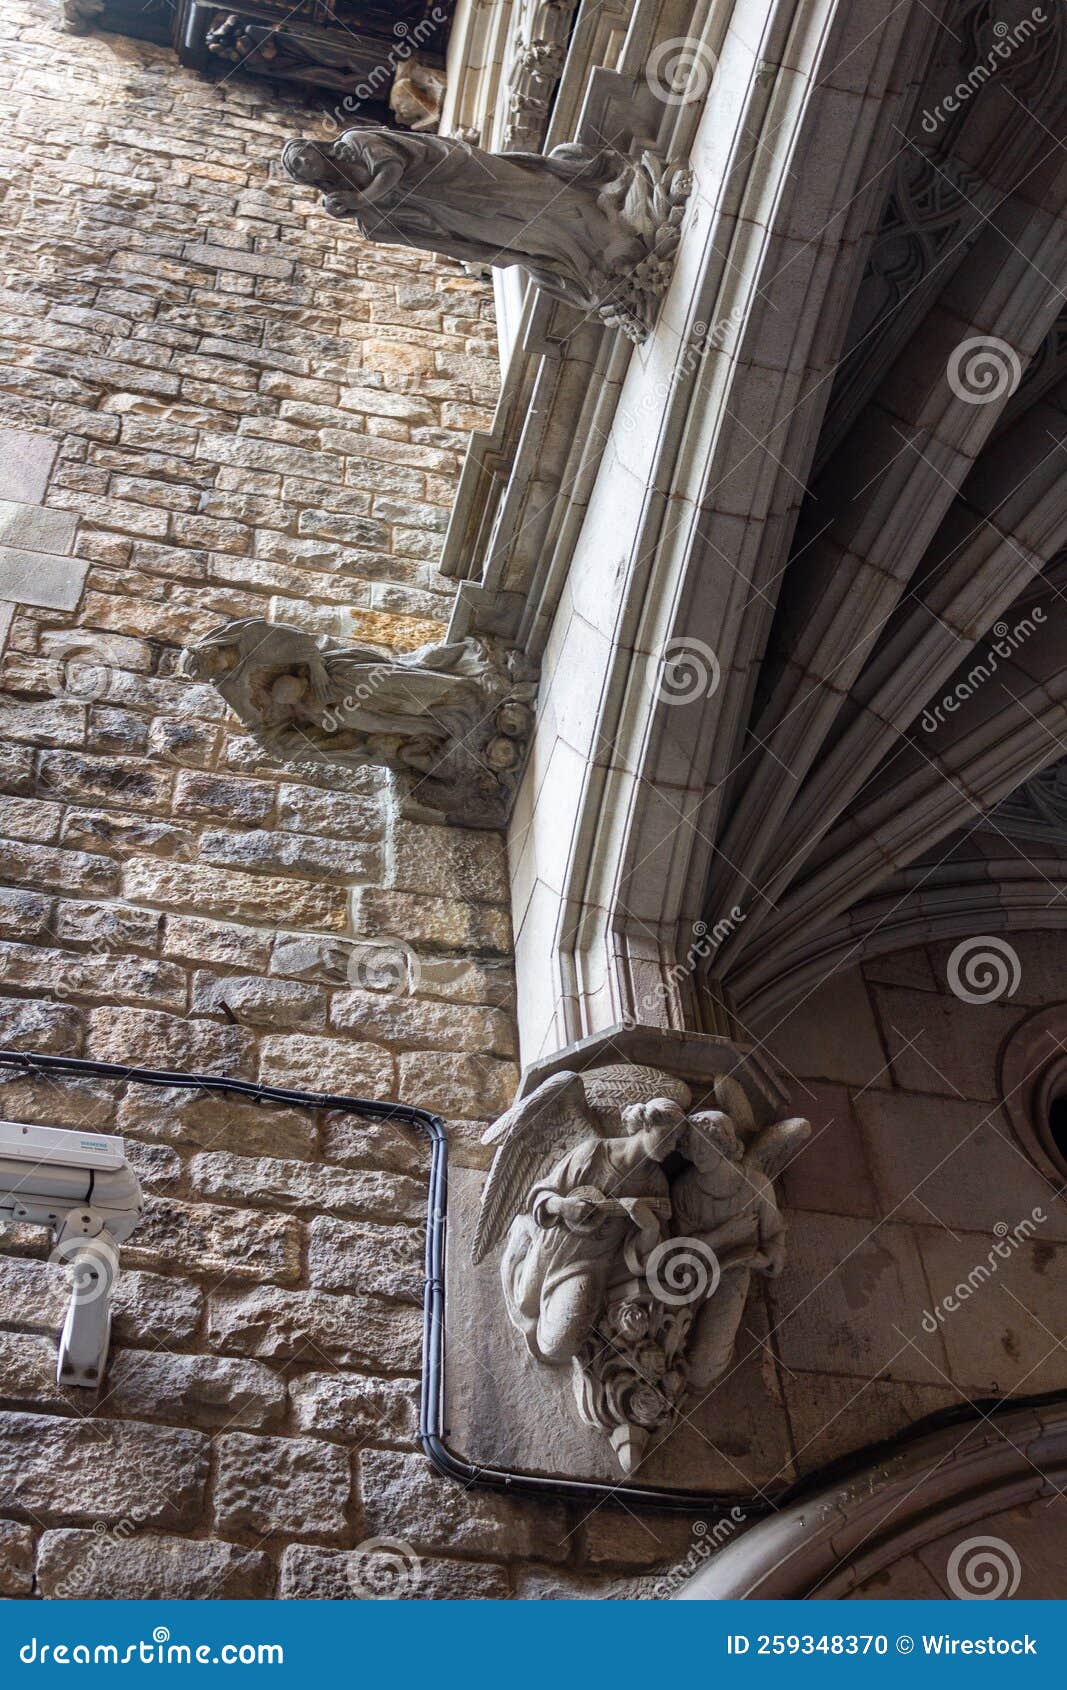 gargoyle statues on the wall of the cathedral in ciutat vella,  barcelona, spain